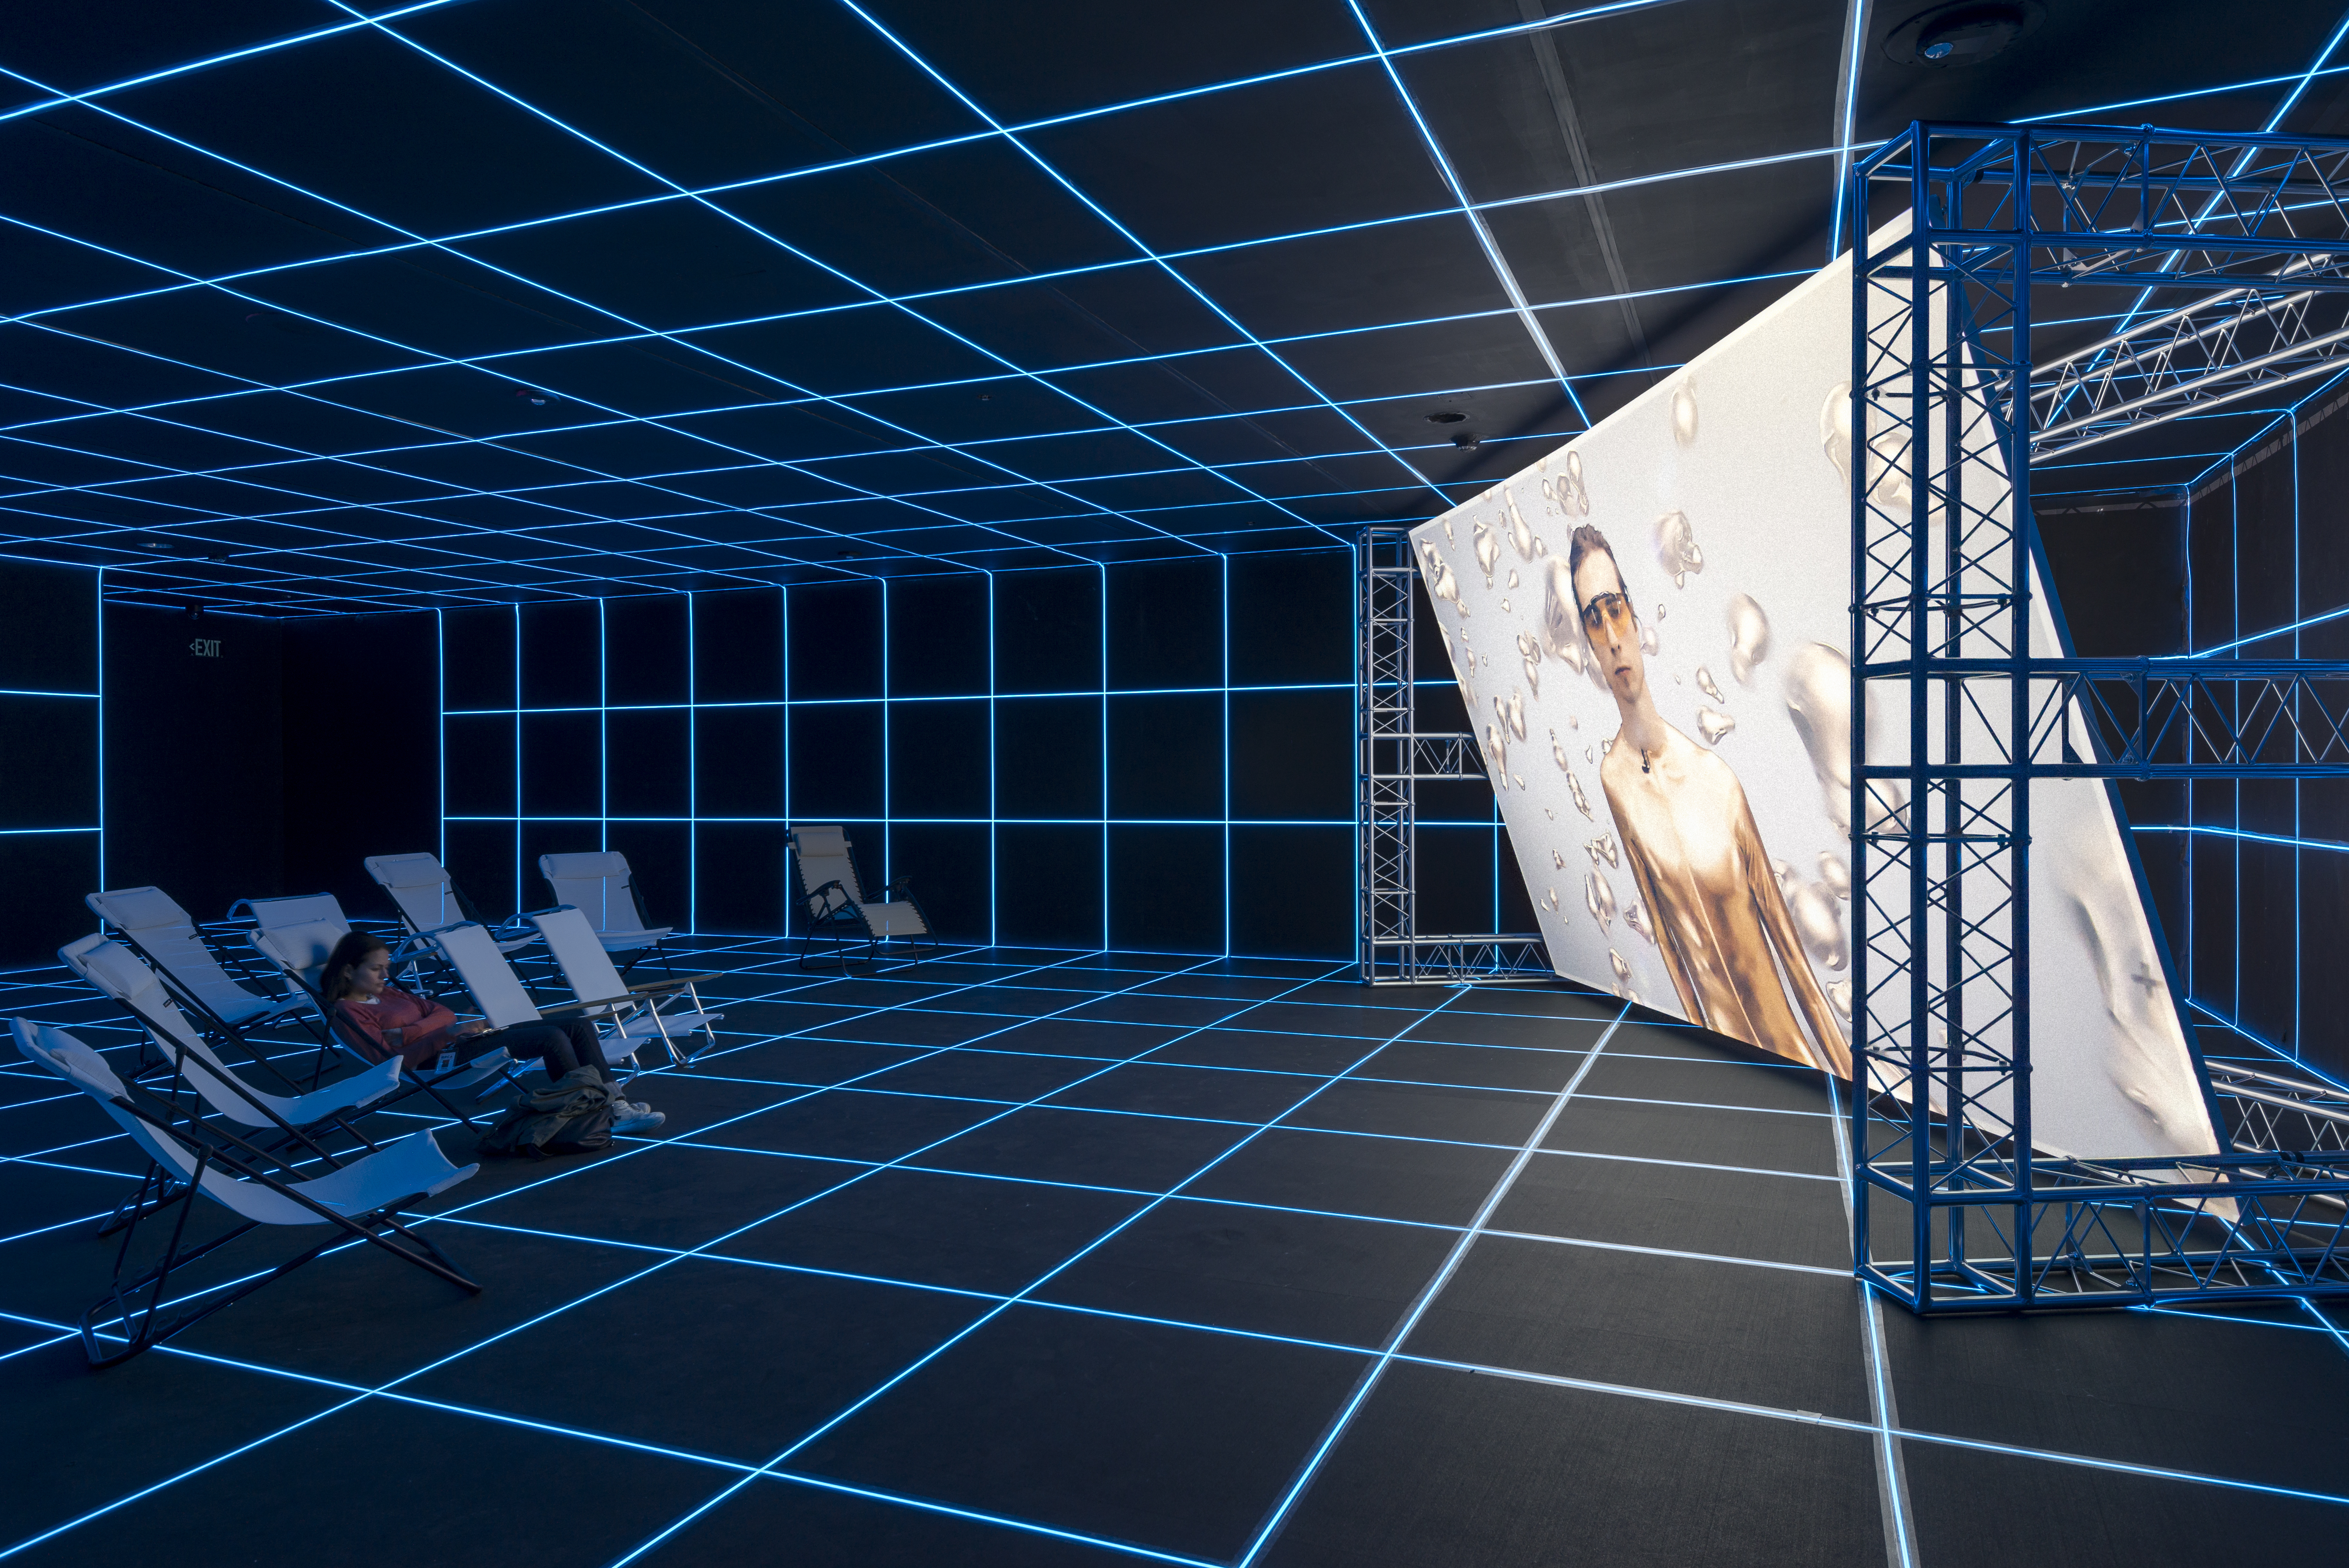 Installation view of Hito Steyerl: Factory of the Sun, February 21–September 12, 2016 at MOCA Grand Avenue, courtesy of The Museum of Contemporary Art, Los Angeles, photo by Justin Lubliner